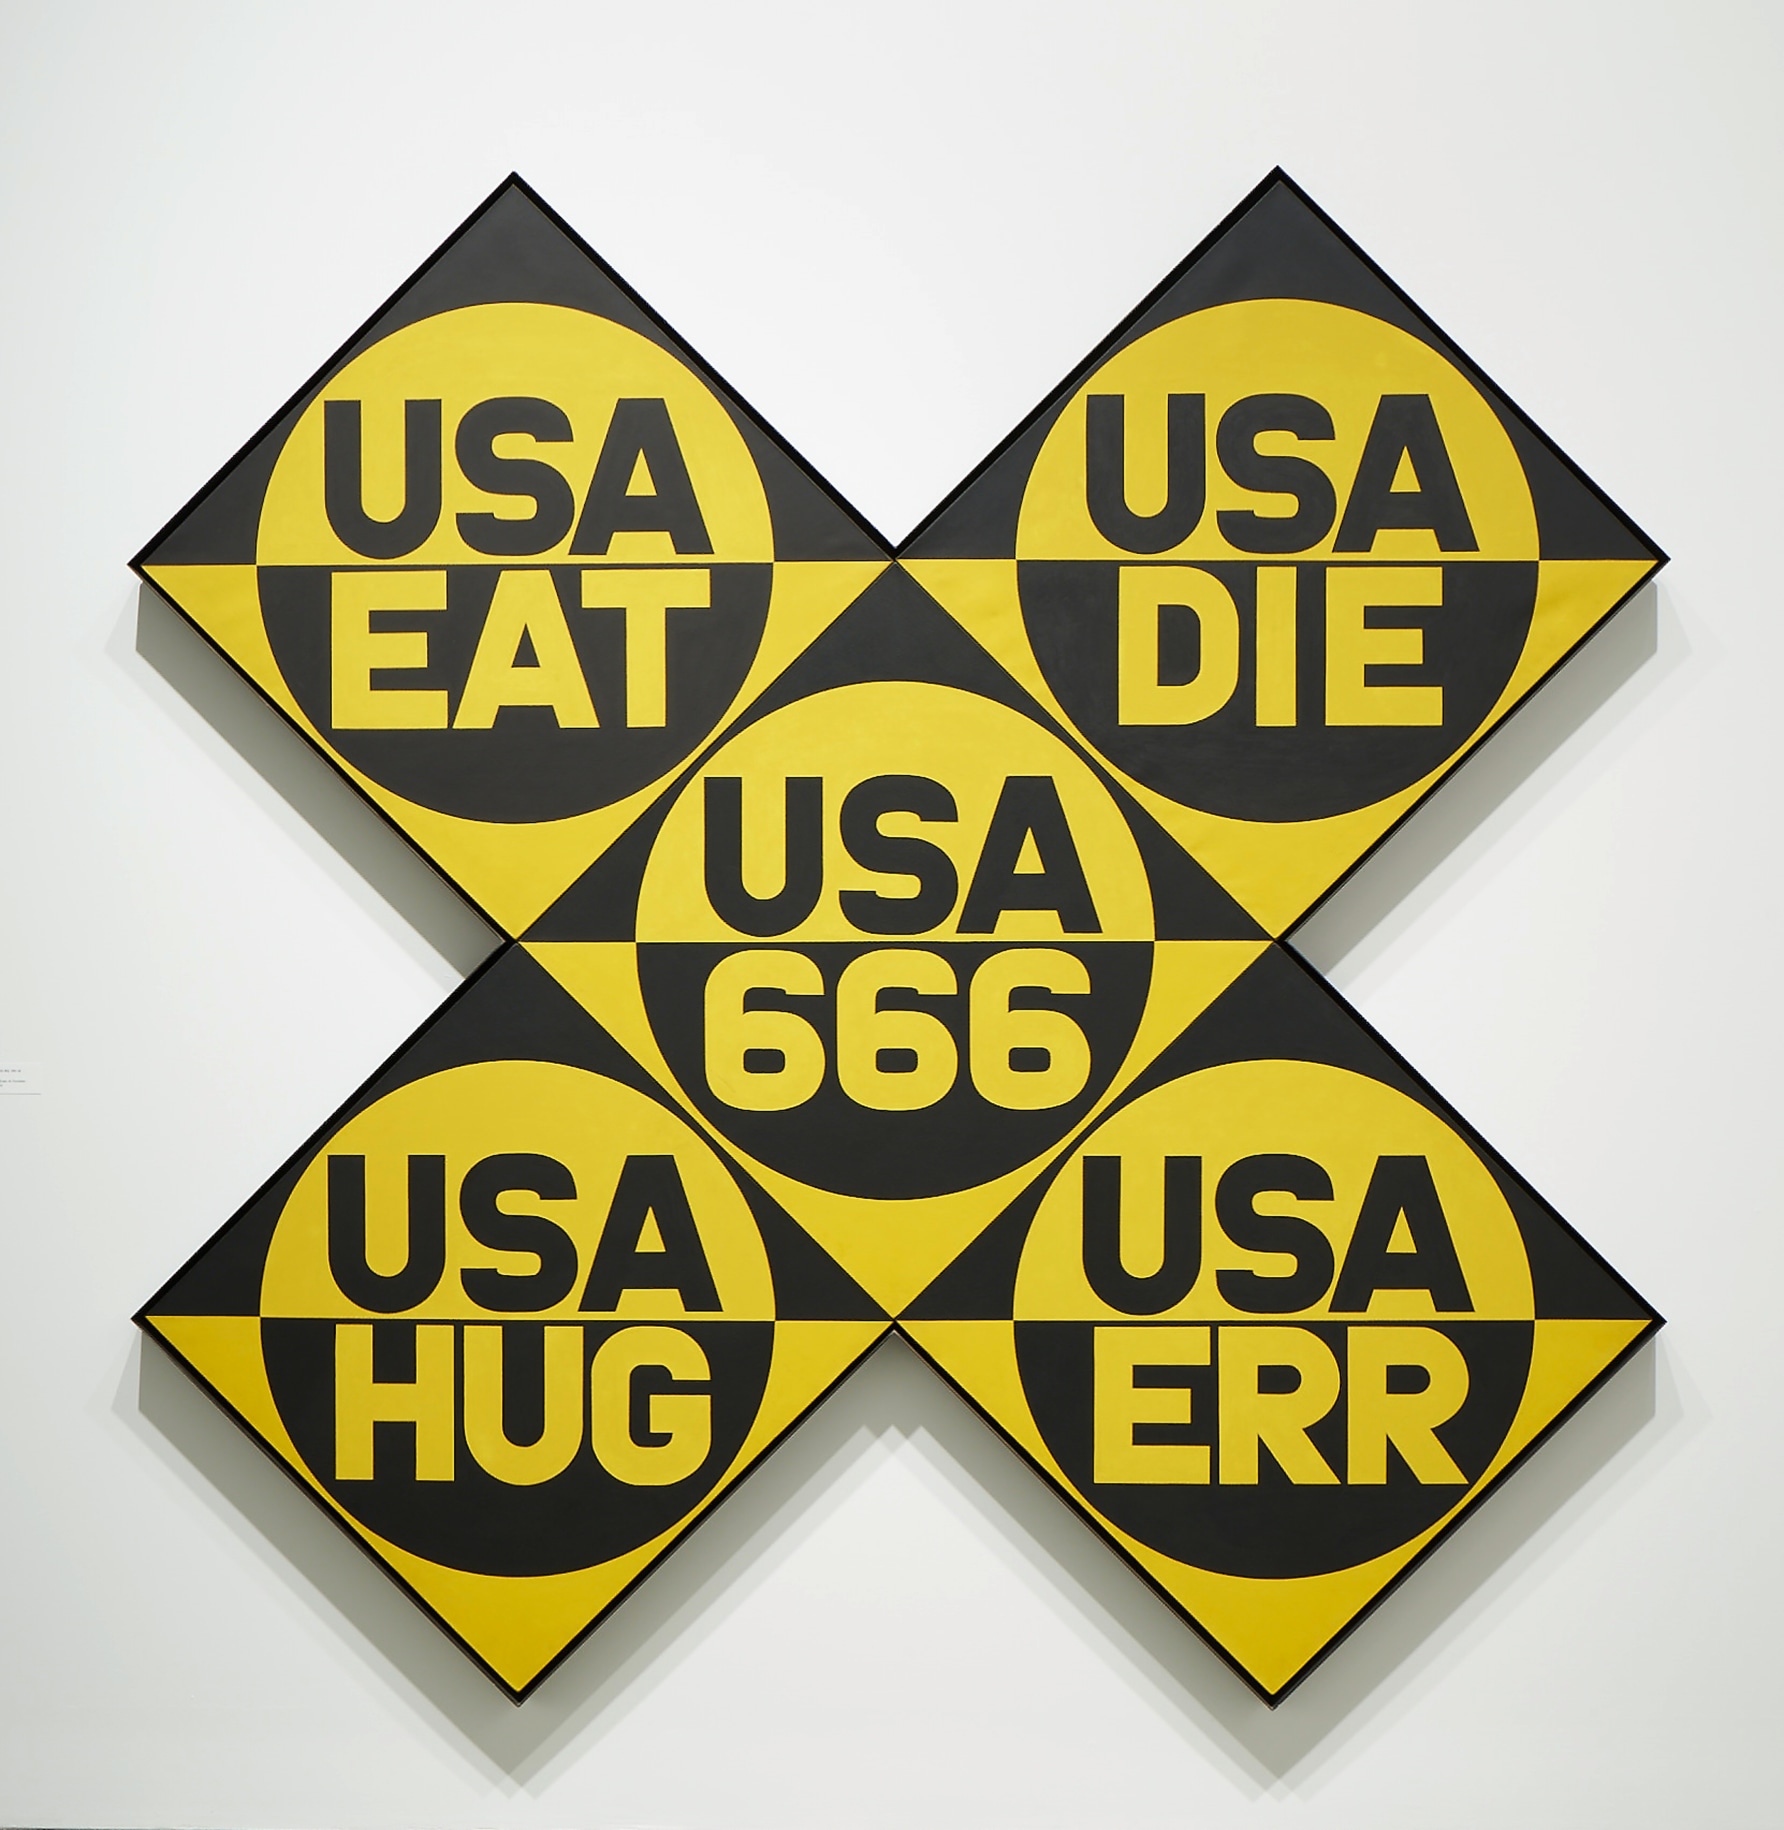 USA 666 (The Sixth American Dream), a yellow and black x-format painting, made up of five panels and measuring 102 by 102 inches overall. Each panel has a circle divided in two, the top half yellow with USA painted in black, and the bottom black with a yellow word. The words are, clockwise from top left, &quot;EAT,&quot;&quot;DIE,&quot; &quot;ERR,&quot; &quot;HUG,&quot; and in the central panel &quot;666.&quot;